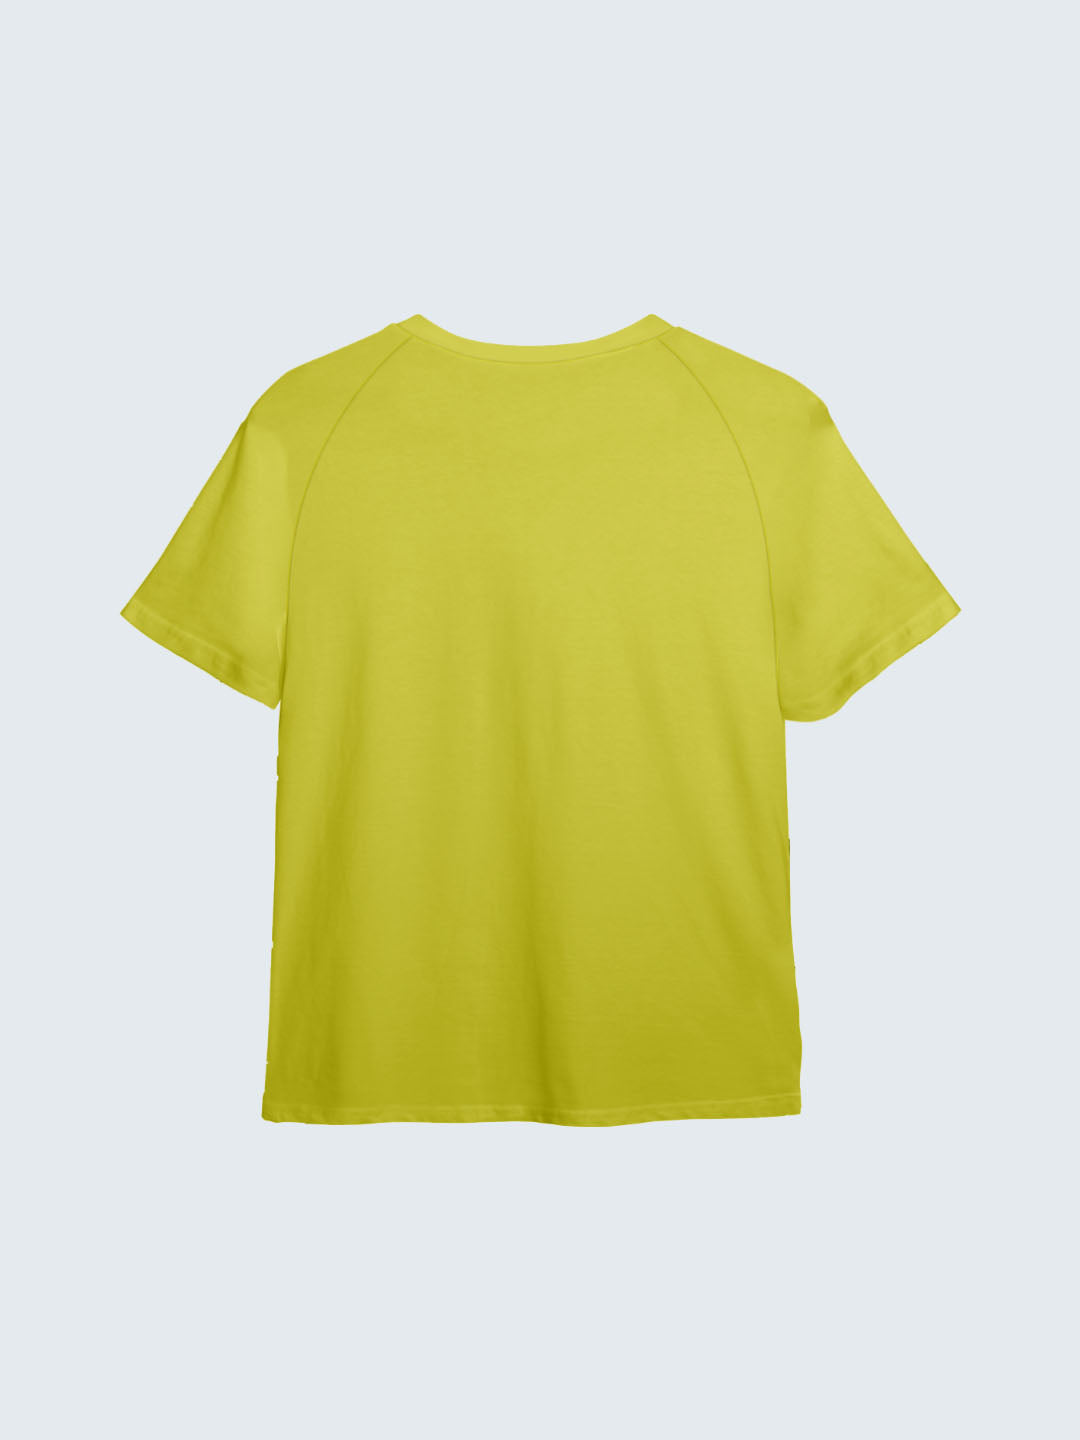 Kid's Active T-Shirt - Yellow (Front)